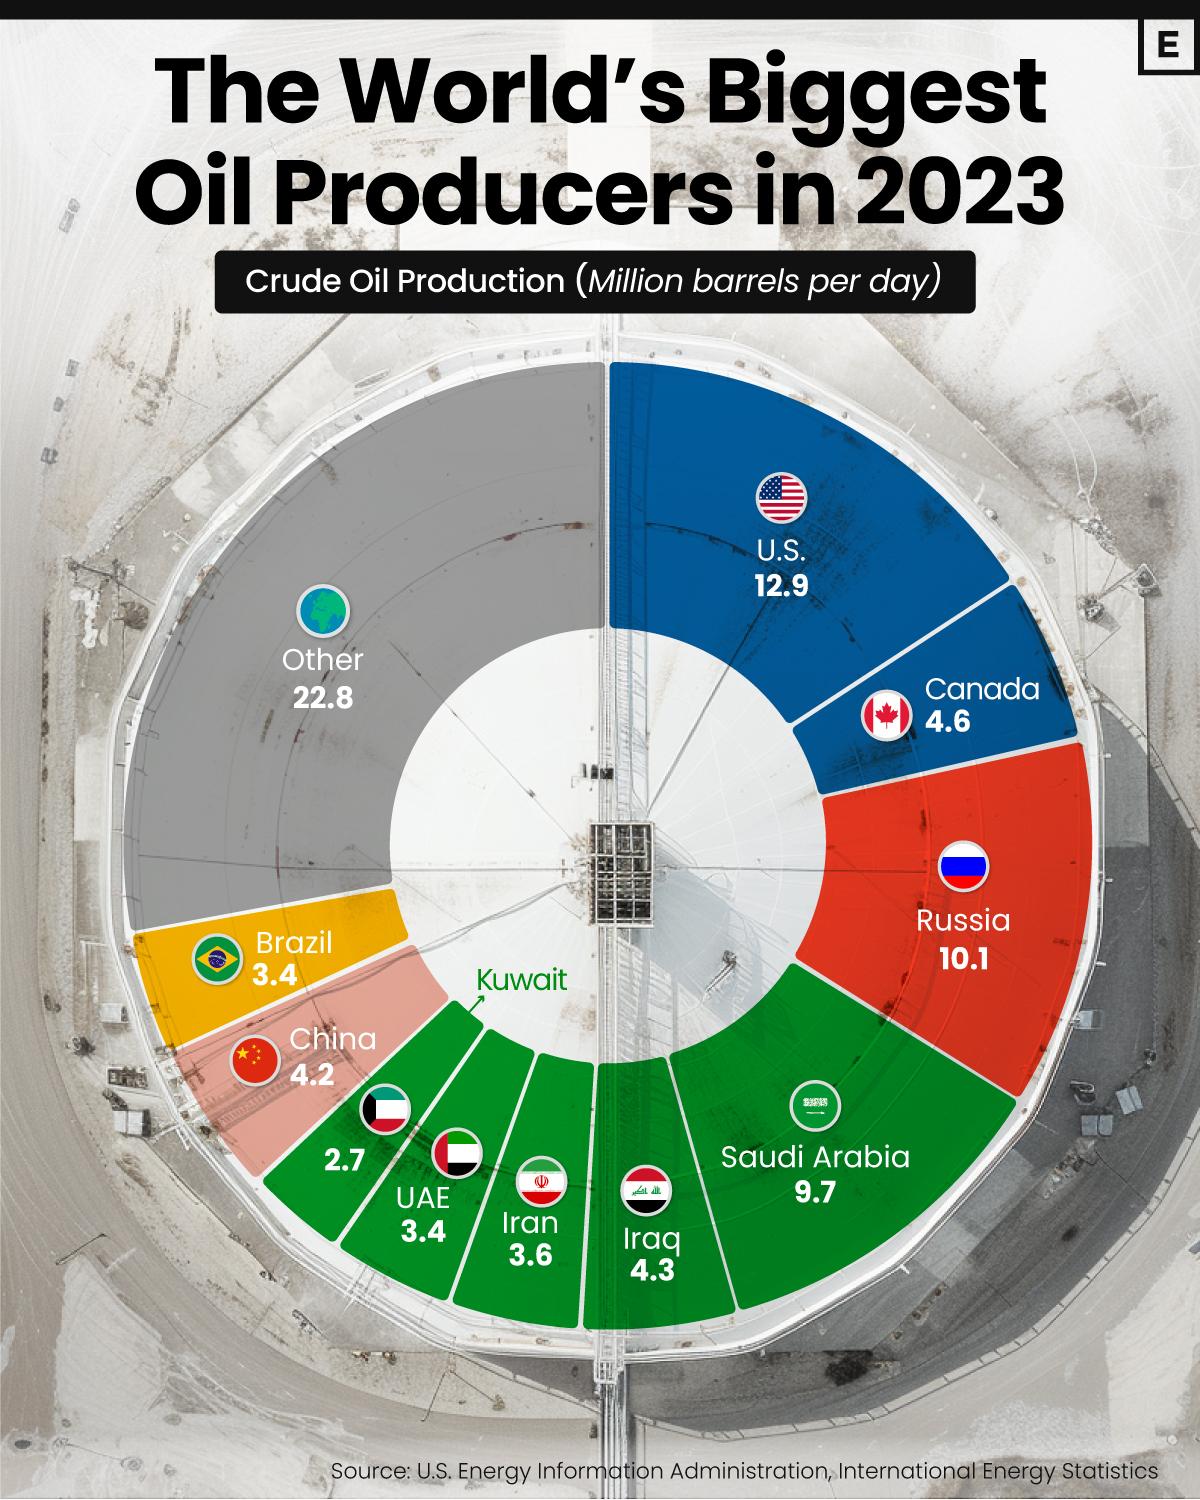 Three Countries Accounted for One-Third of Global Oil Production in 2023